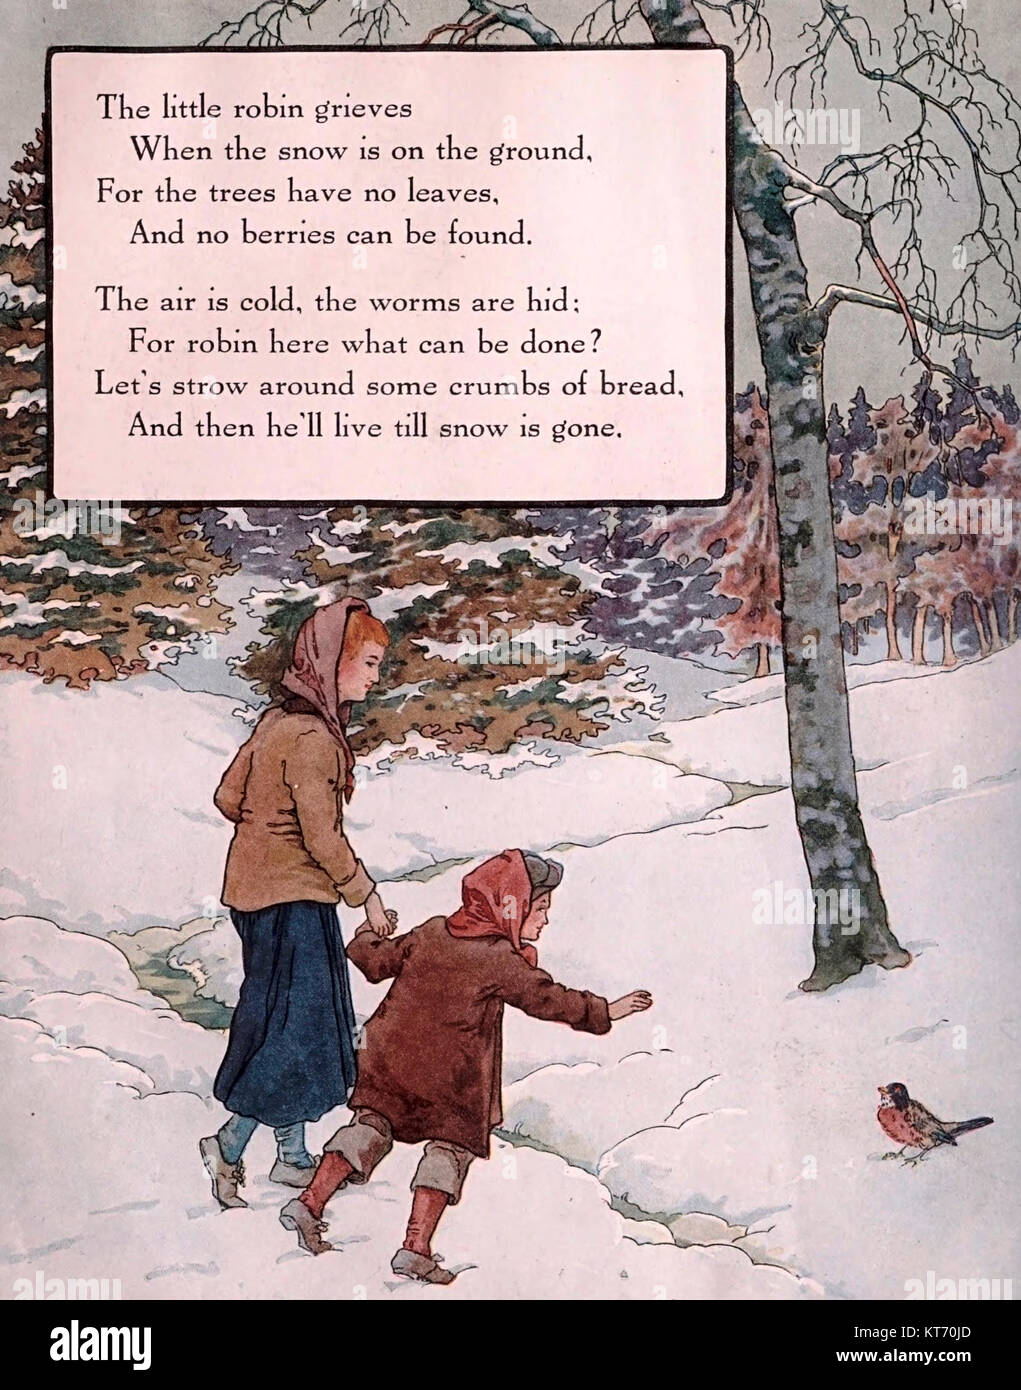 The Little Robin grieves when the snow is on the ground - Mother Goose Nursery Rhyme Stock Photo